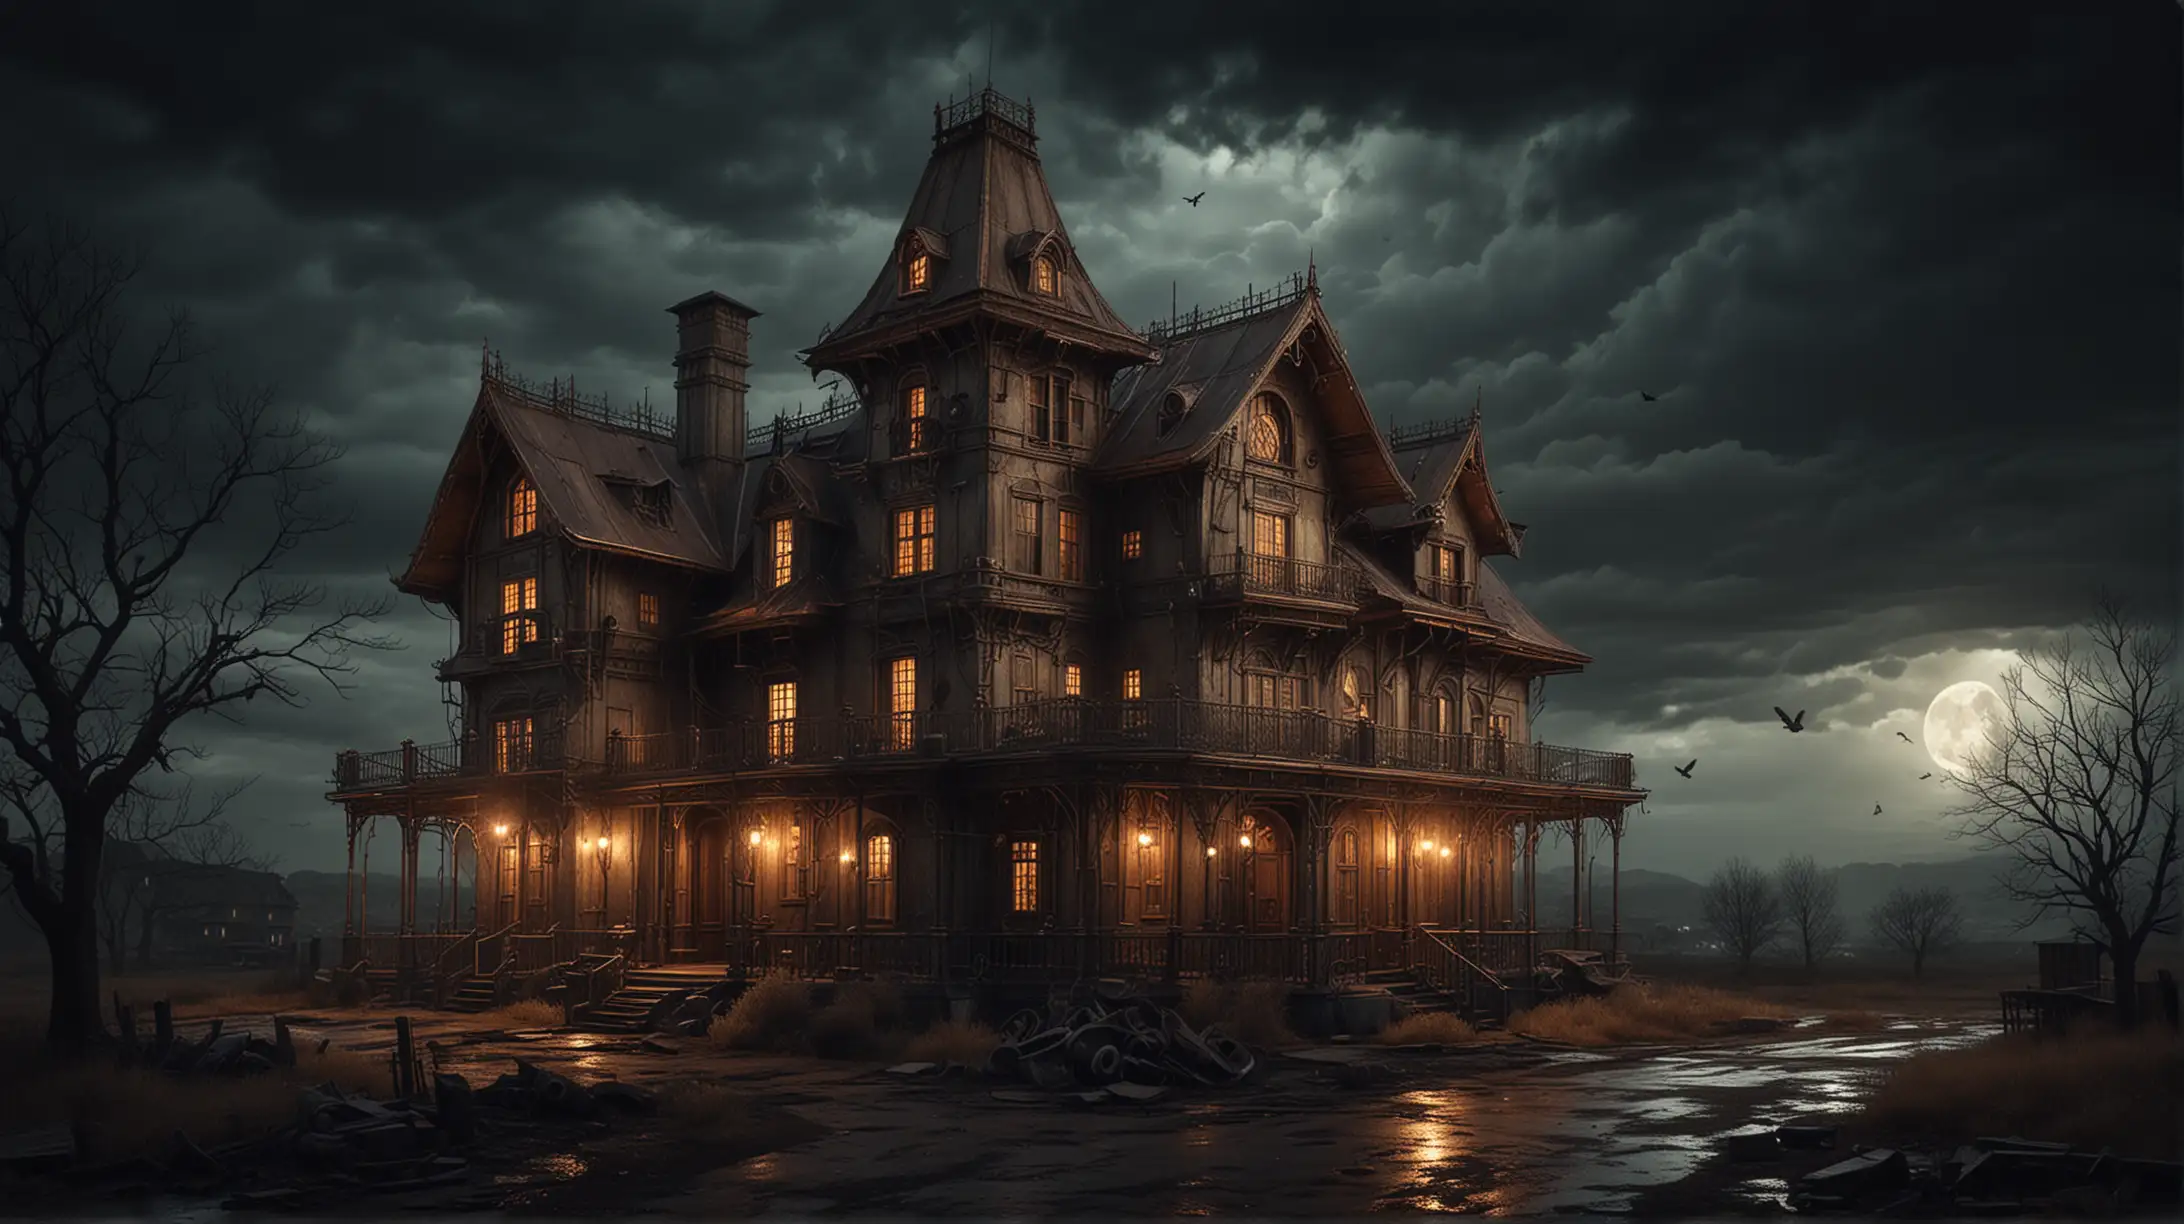 Steampunk Manor House in the Wasteland Copper and Wood Illuminated by Stormy Night Lights